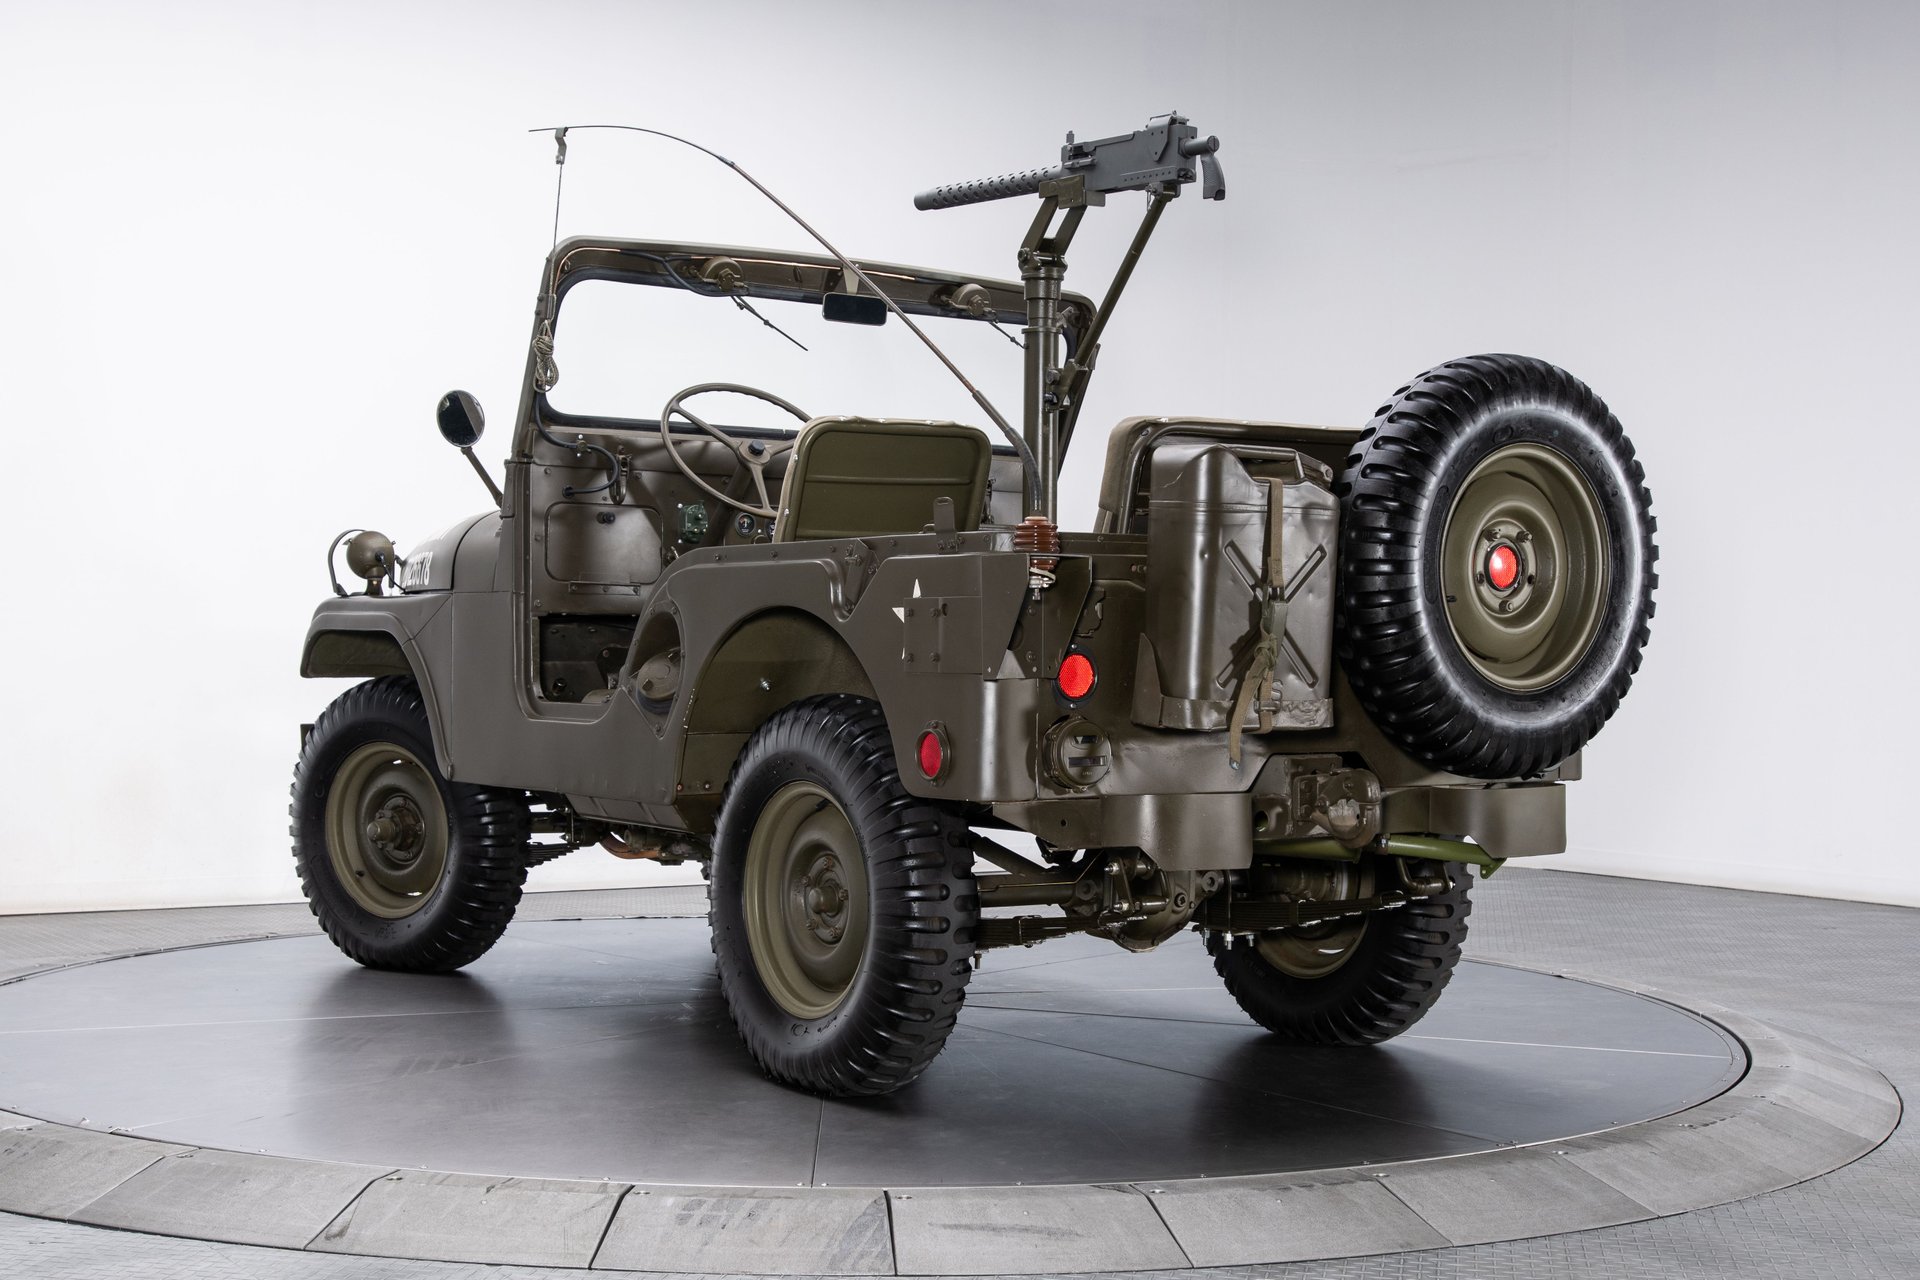 For Sale 1953 Willys M38A1